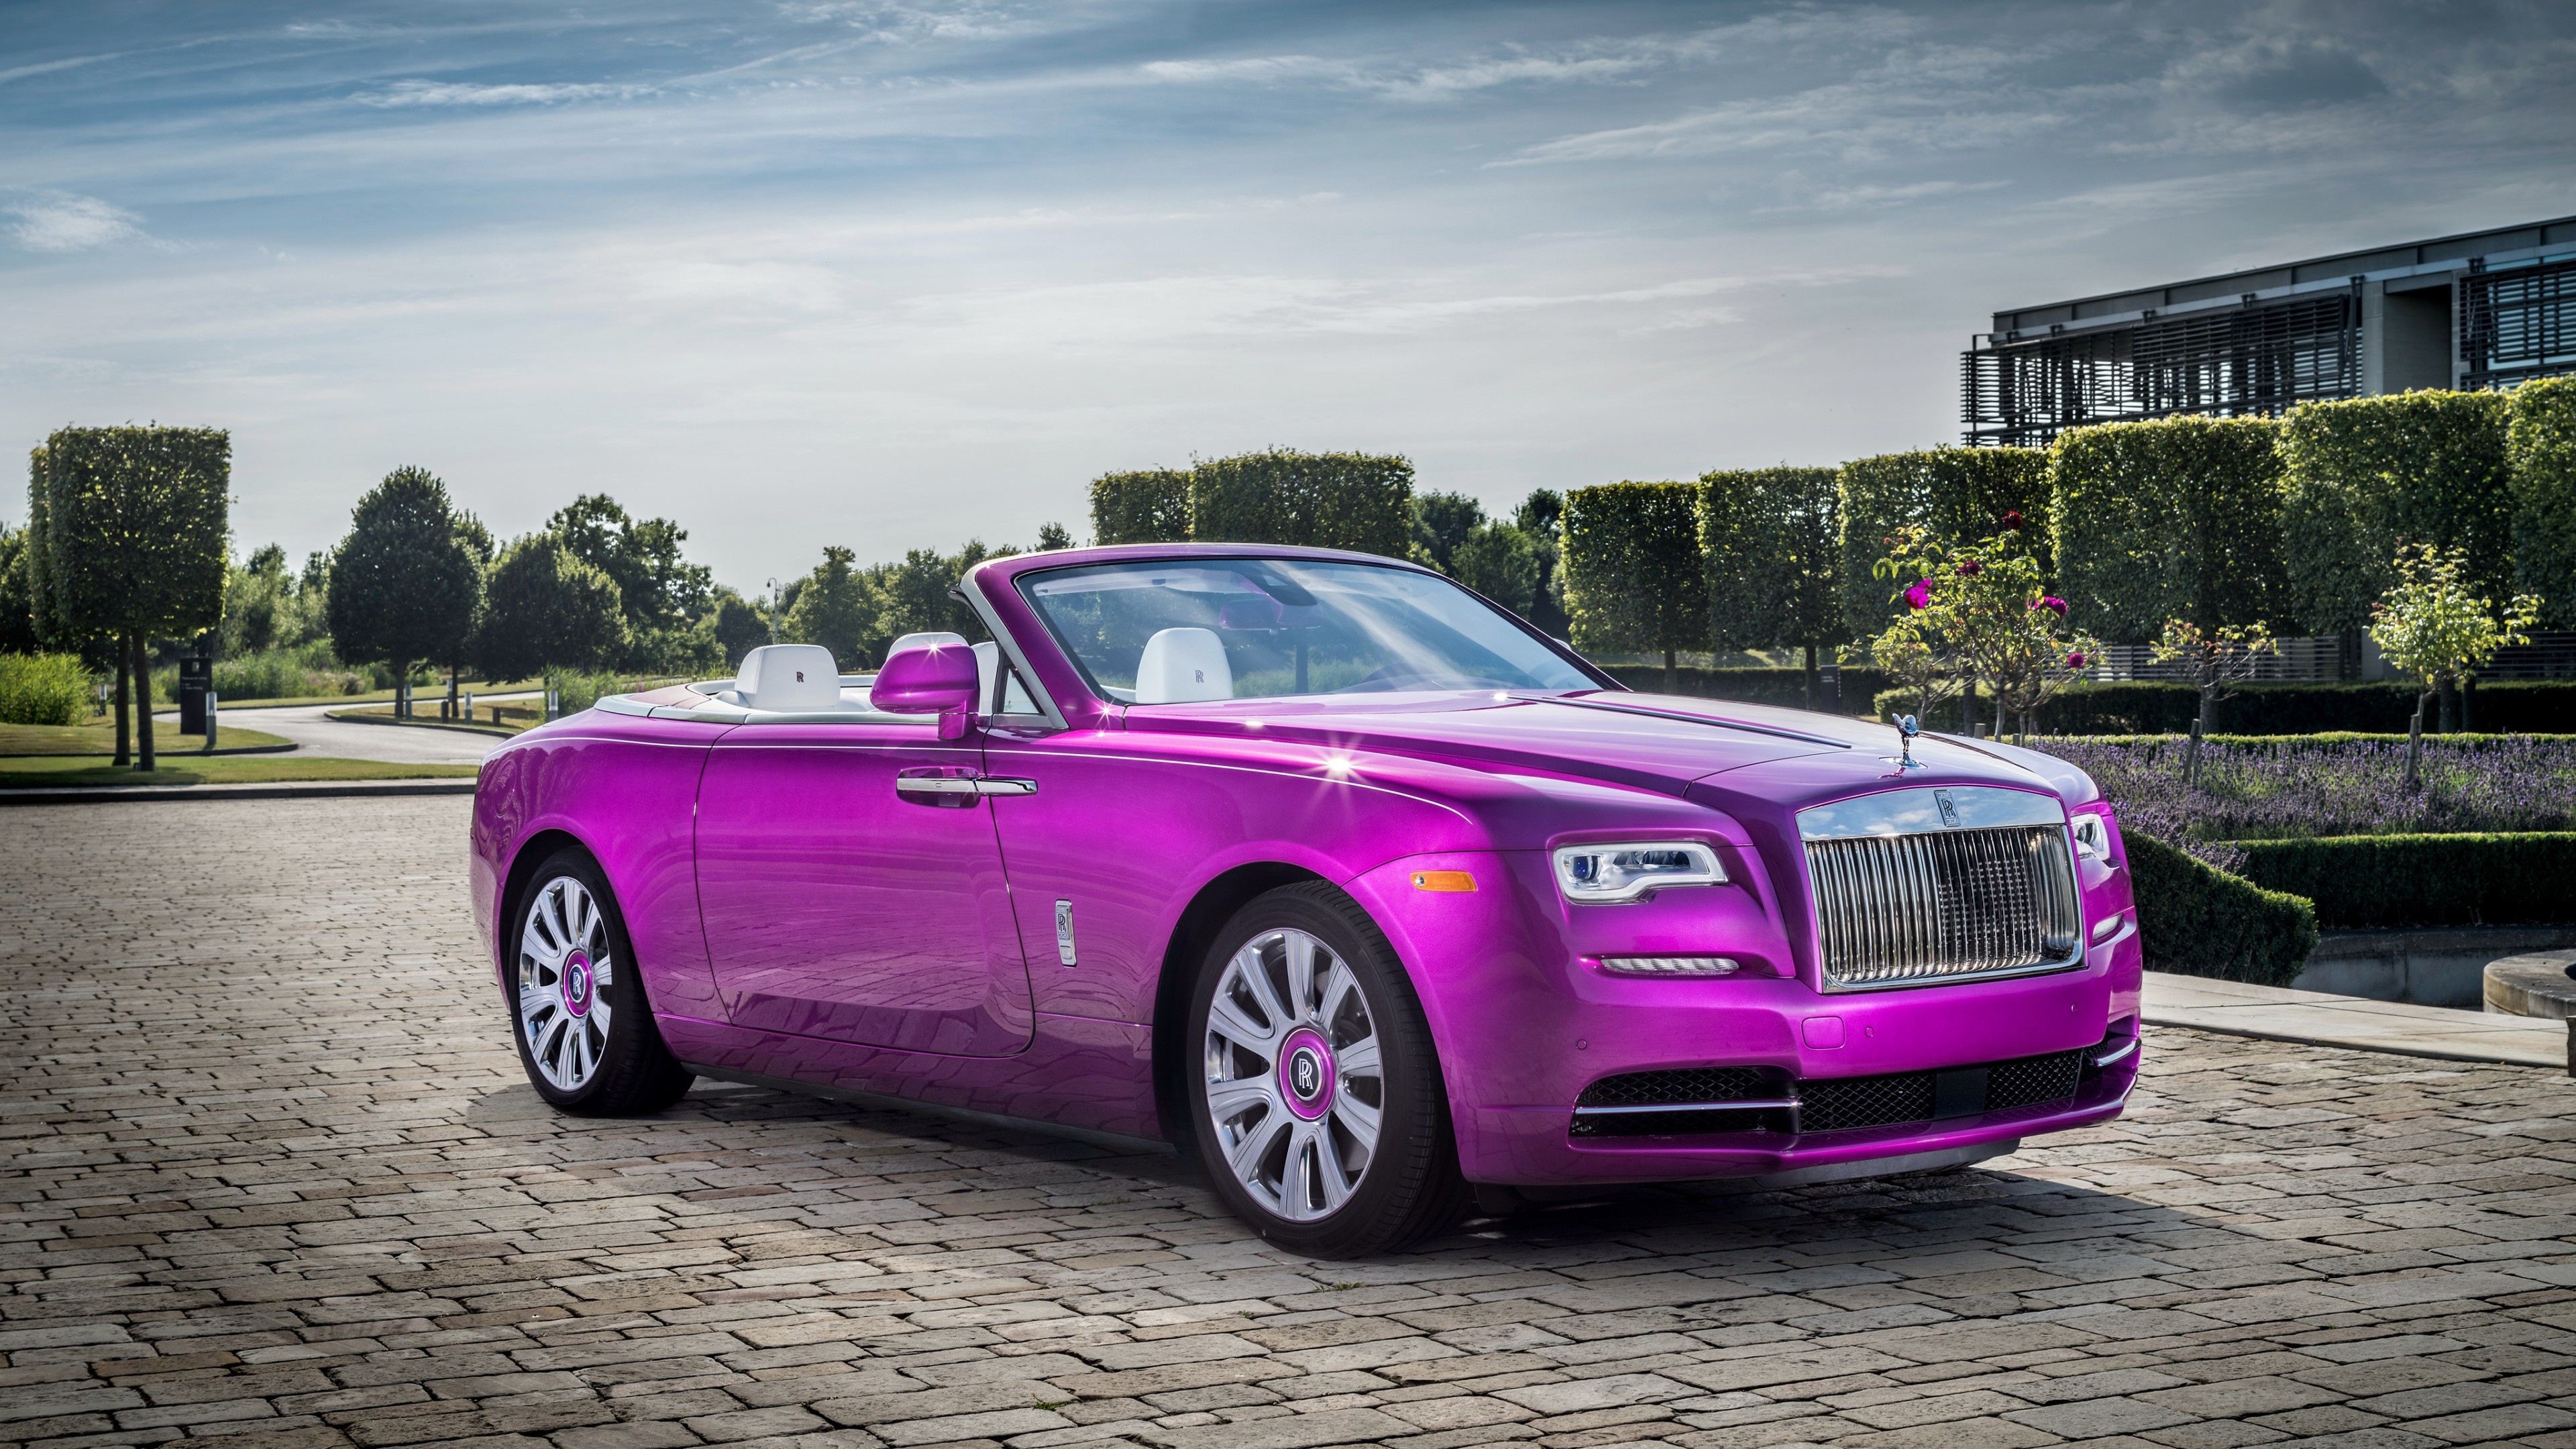 Rolls-Royce Dawn, Pink color, High-quality wallpapers, Luxury cars, 3840x2160 4K Desktop